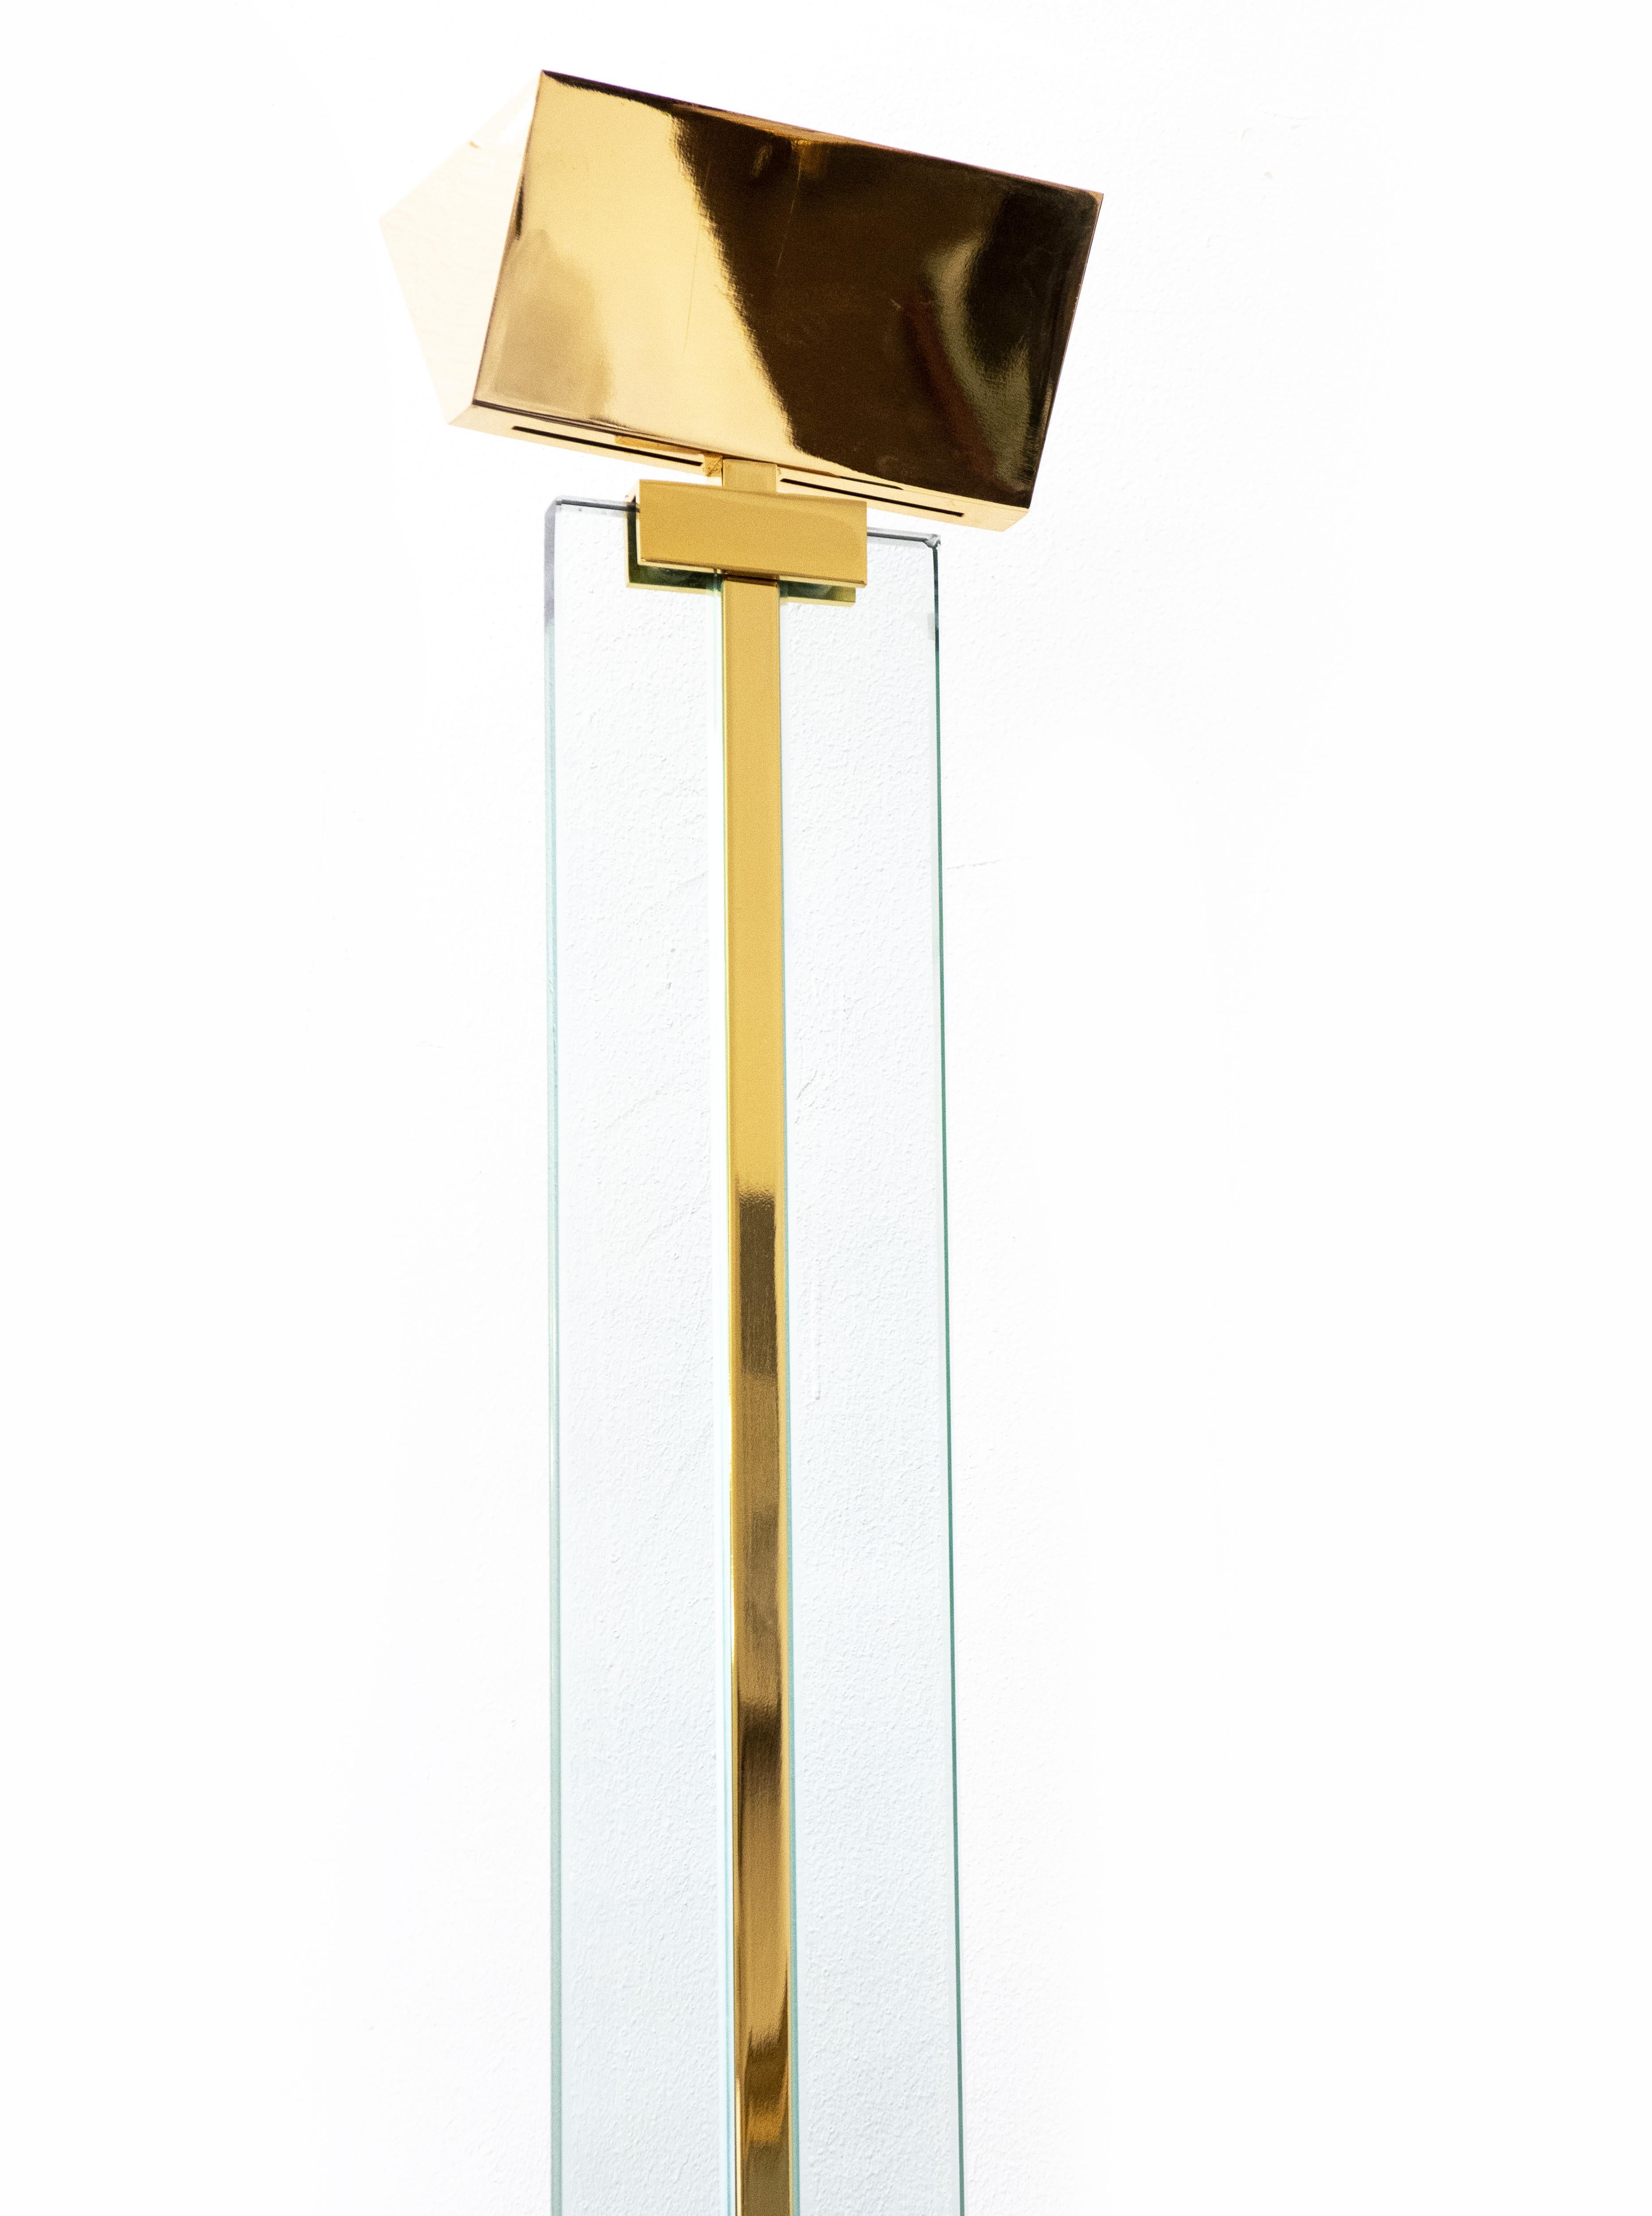 Pair of Floor Lamp is an original Contemporary Design Artwork realized by Gianfranco Frattini (Padua, 1926 - Milan, 2004) in the 1970s

Made in Italy, brass and Crystal by Relco Design.

Dimensions: 188 x 40 x 50 cm. 

Both are in very good